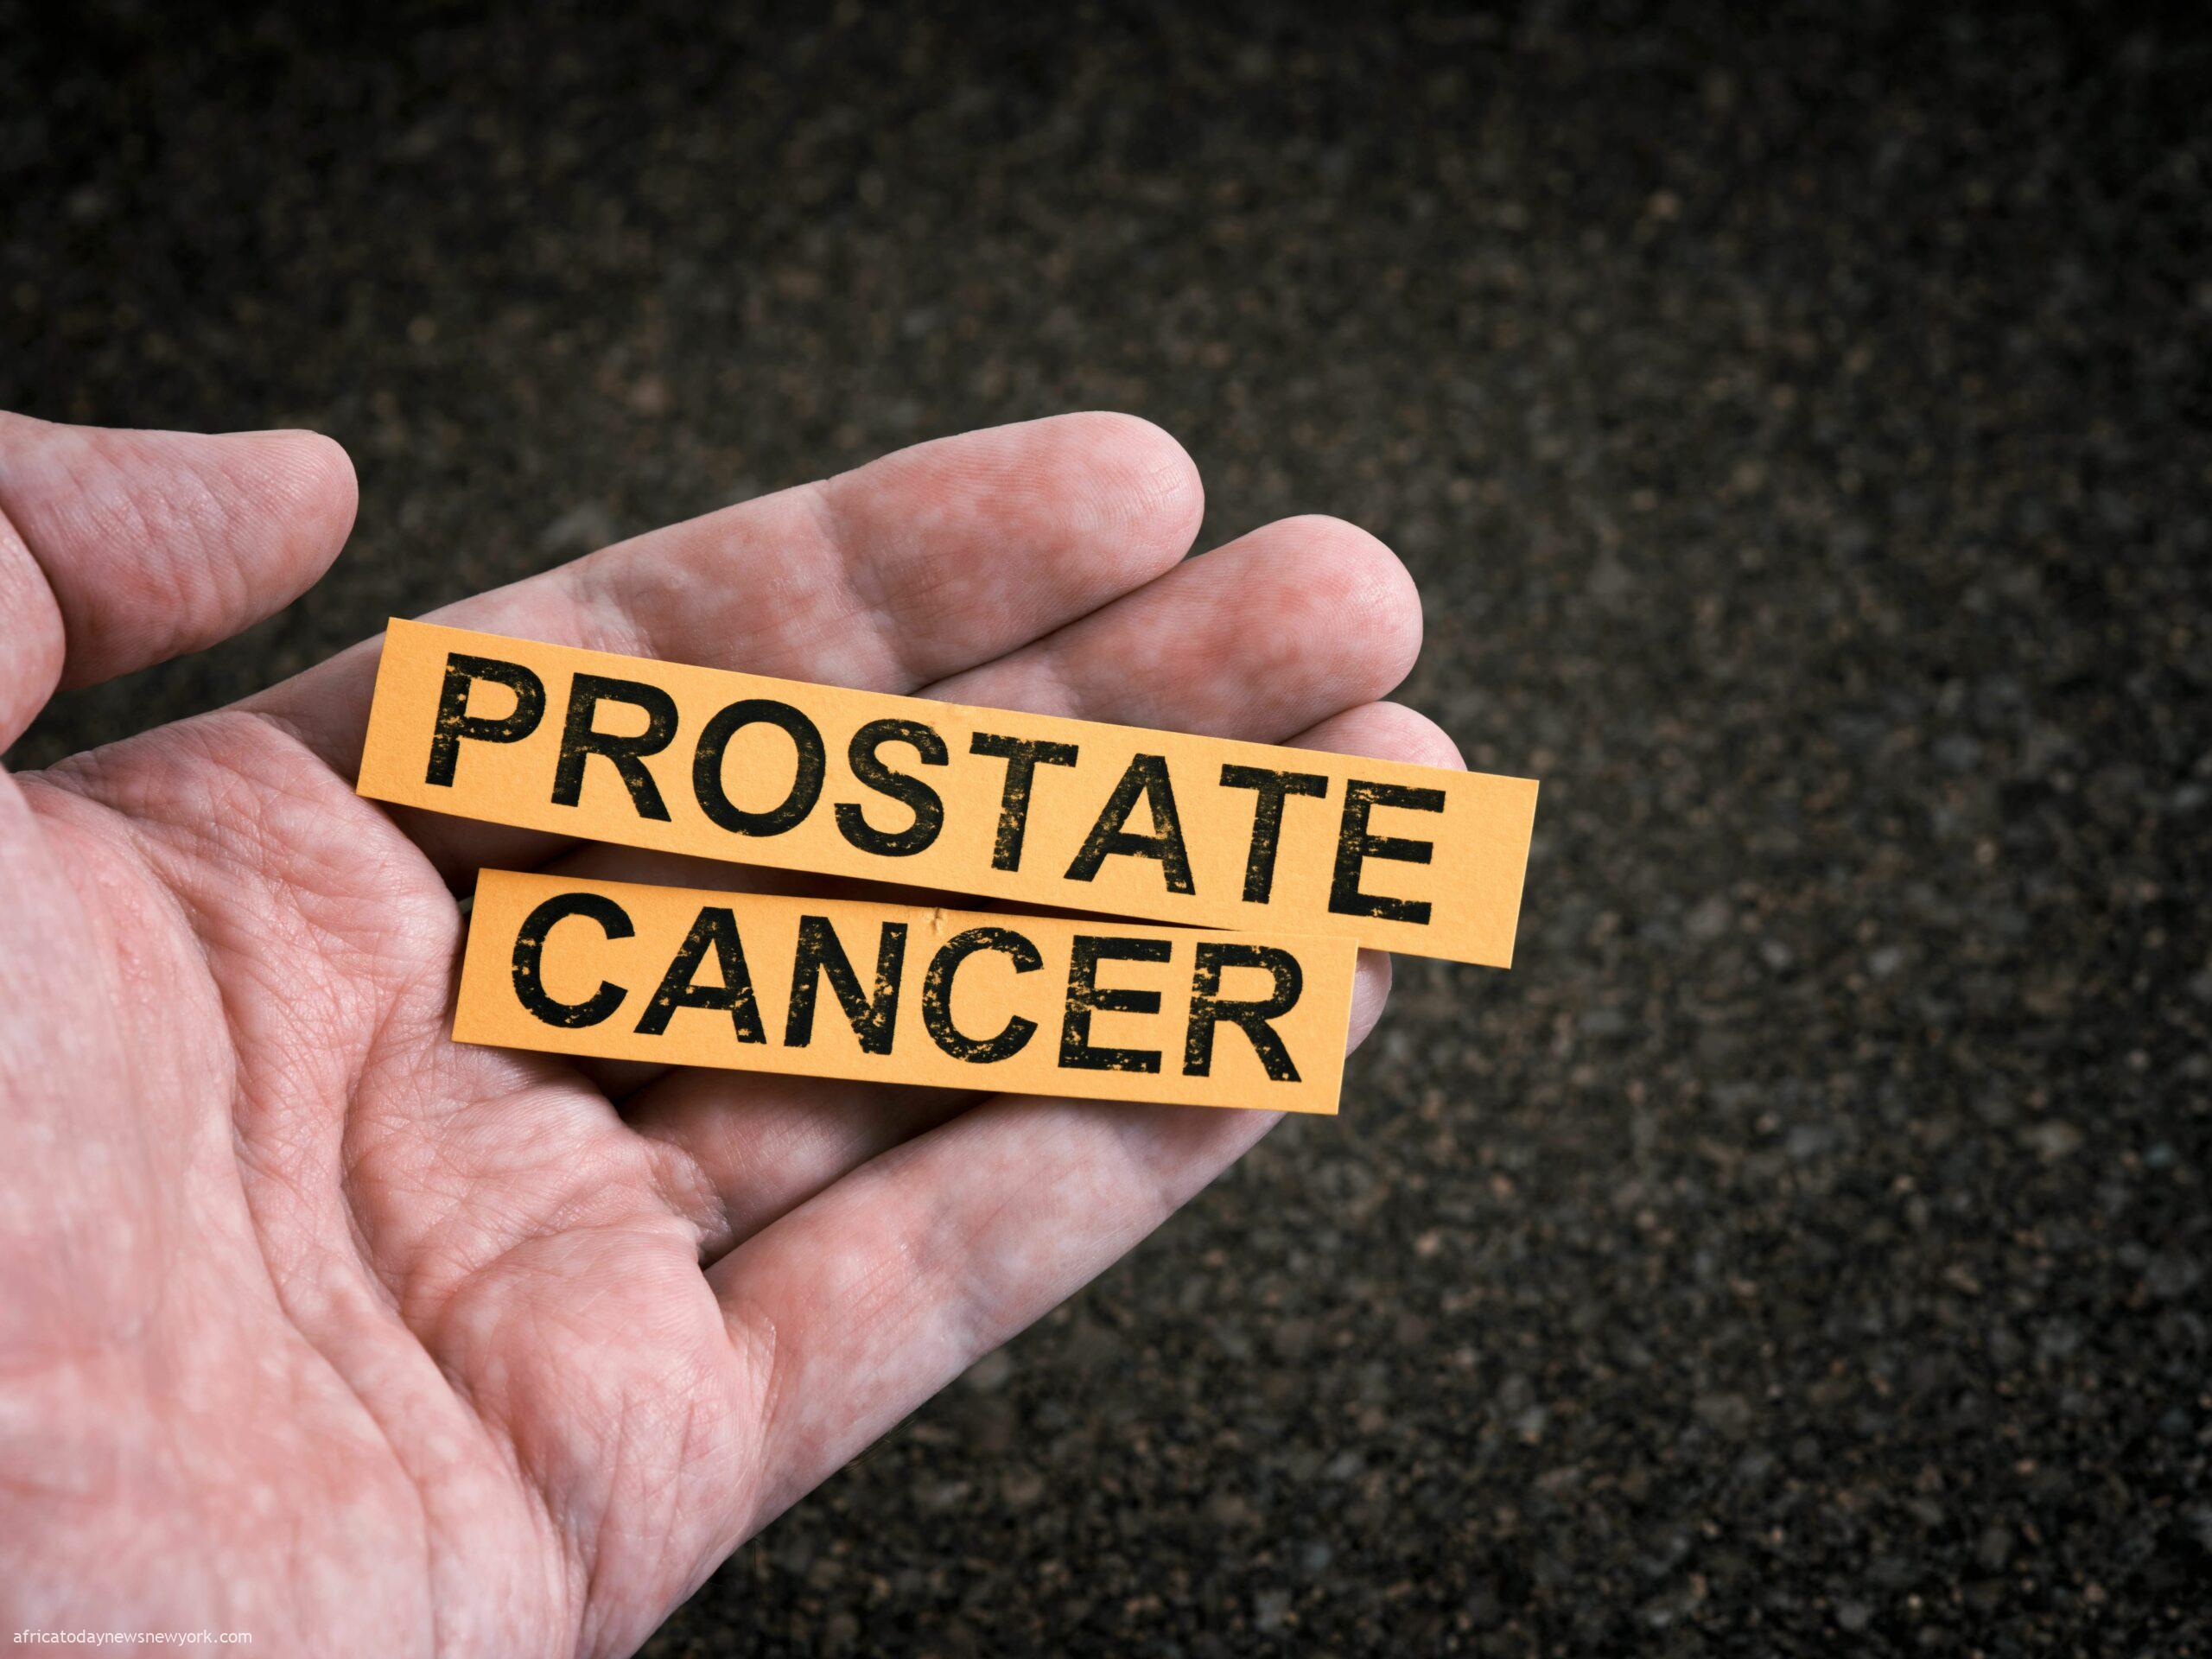 Prostate Cancer Cases To Double In 2 Decades, Study Predicts